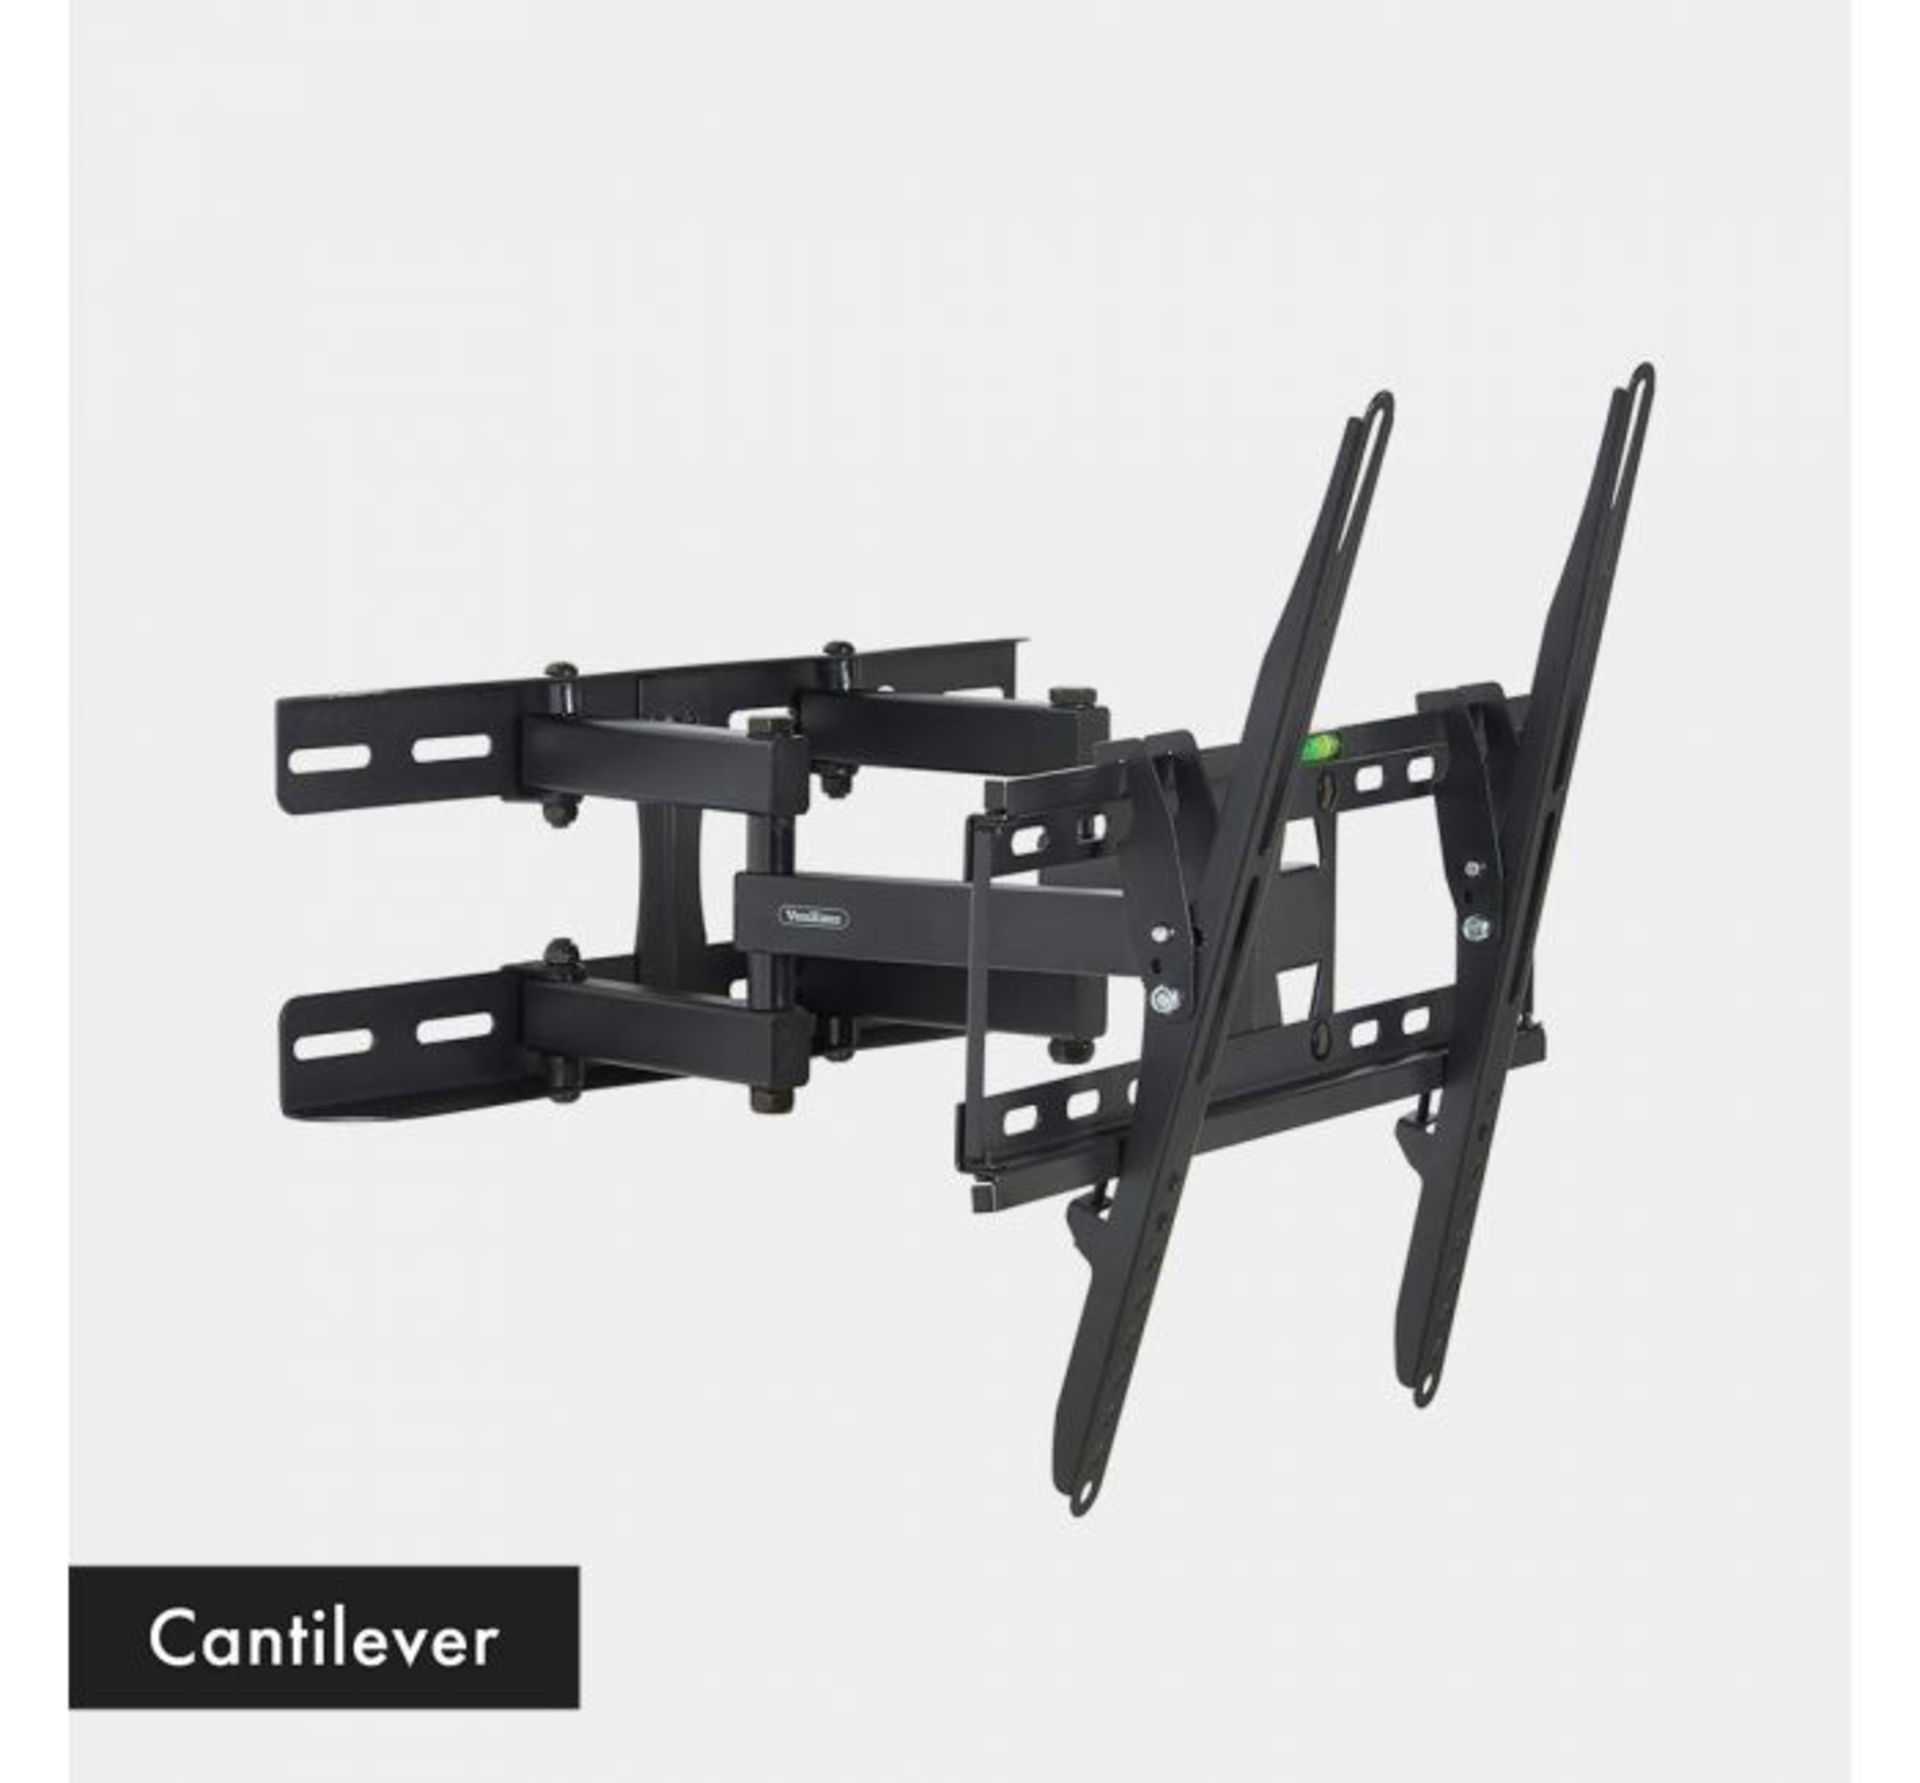 (OM85) 23-56 inch Cantilever TV bracket Please confirm your TV’s VESA Mounting Dimensions an... - Image 2 of 2